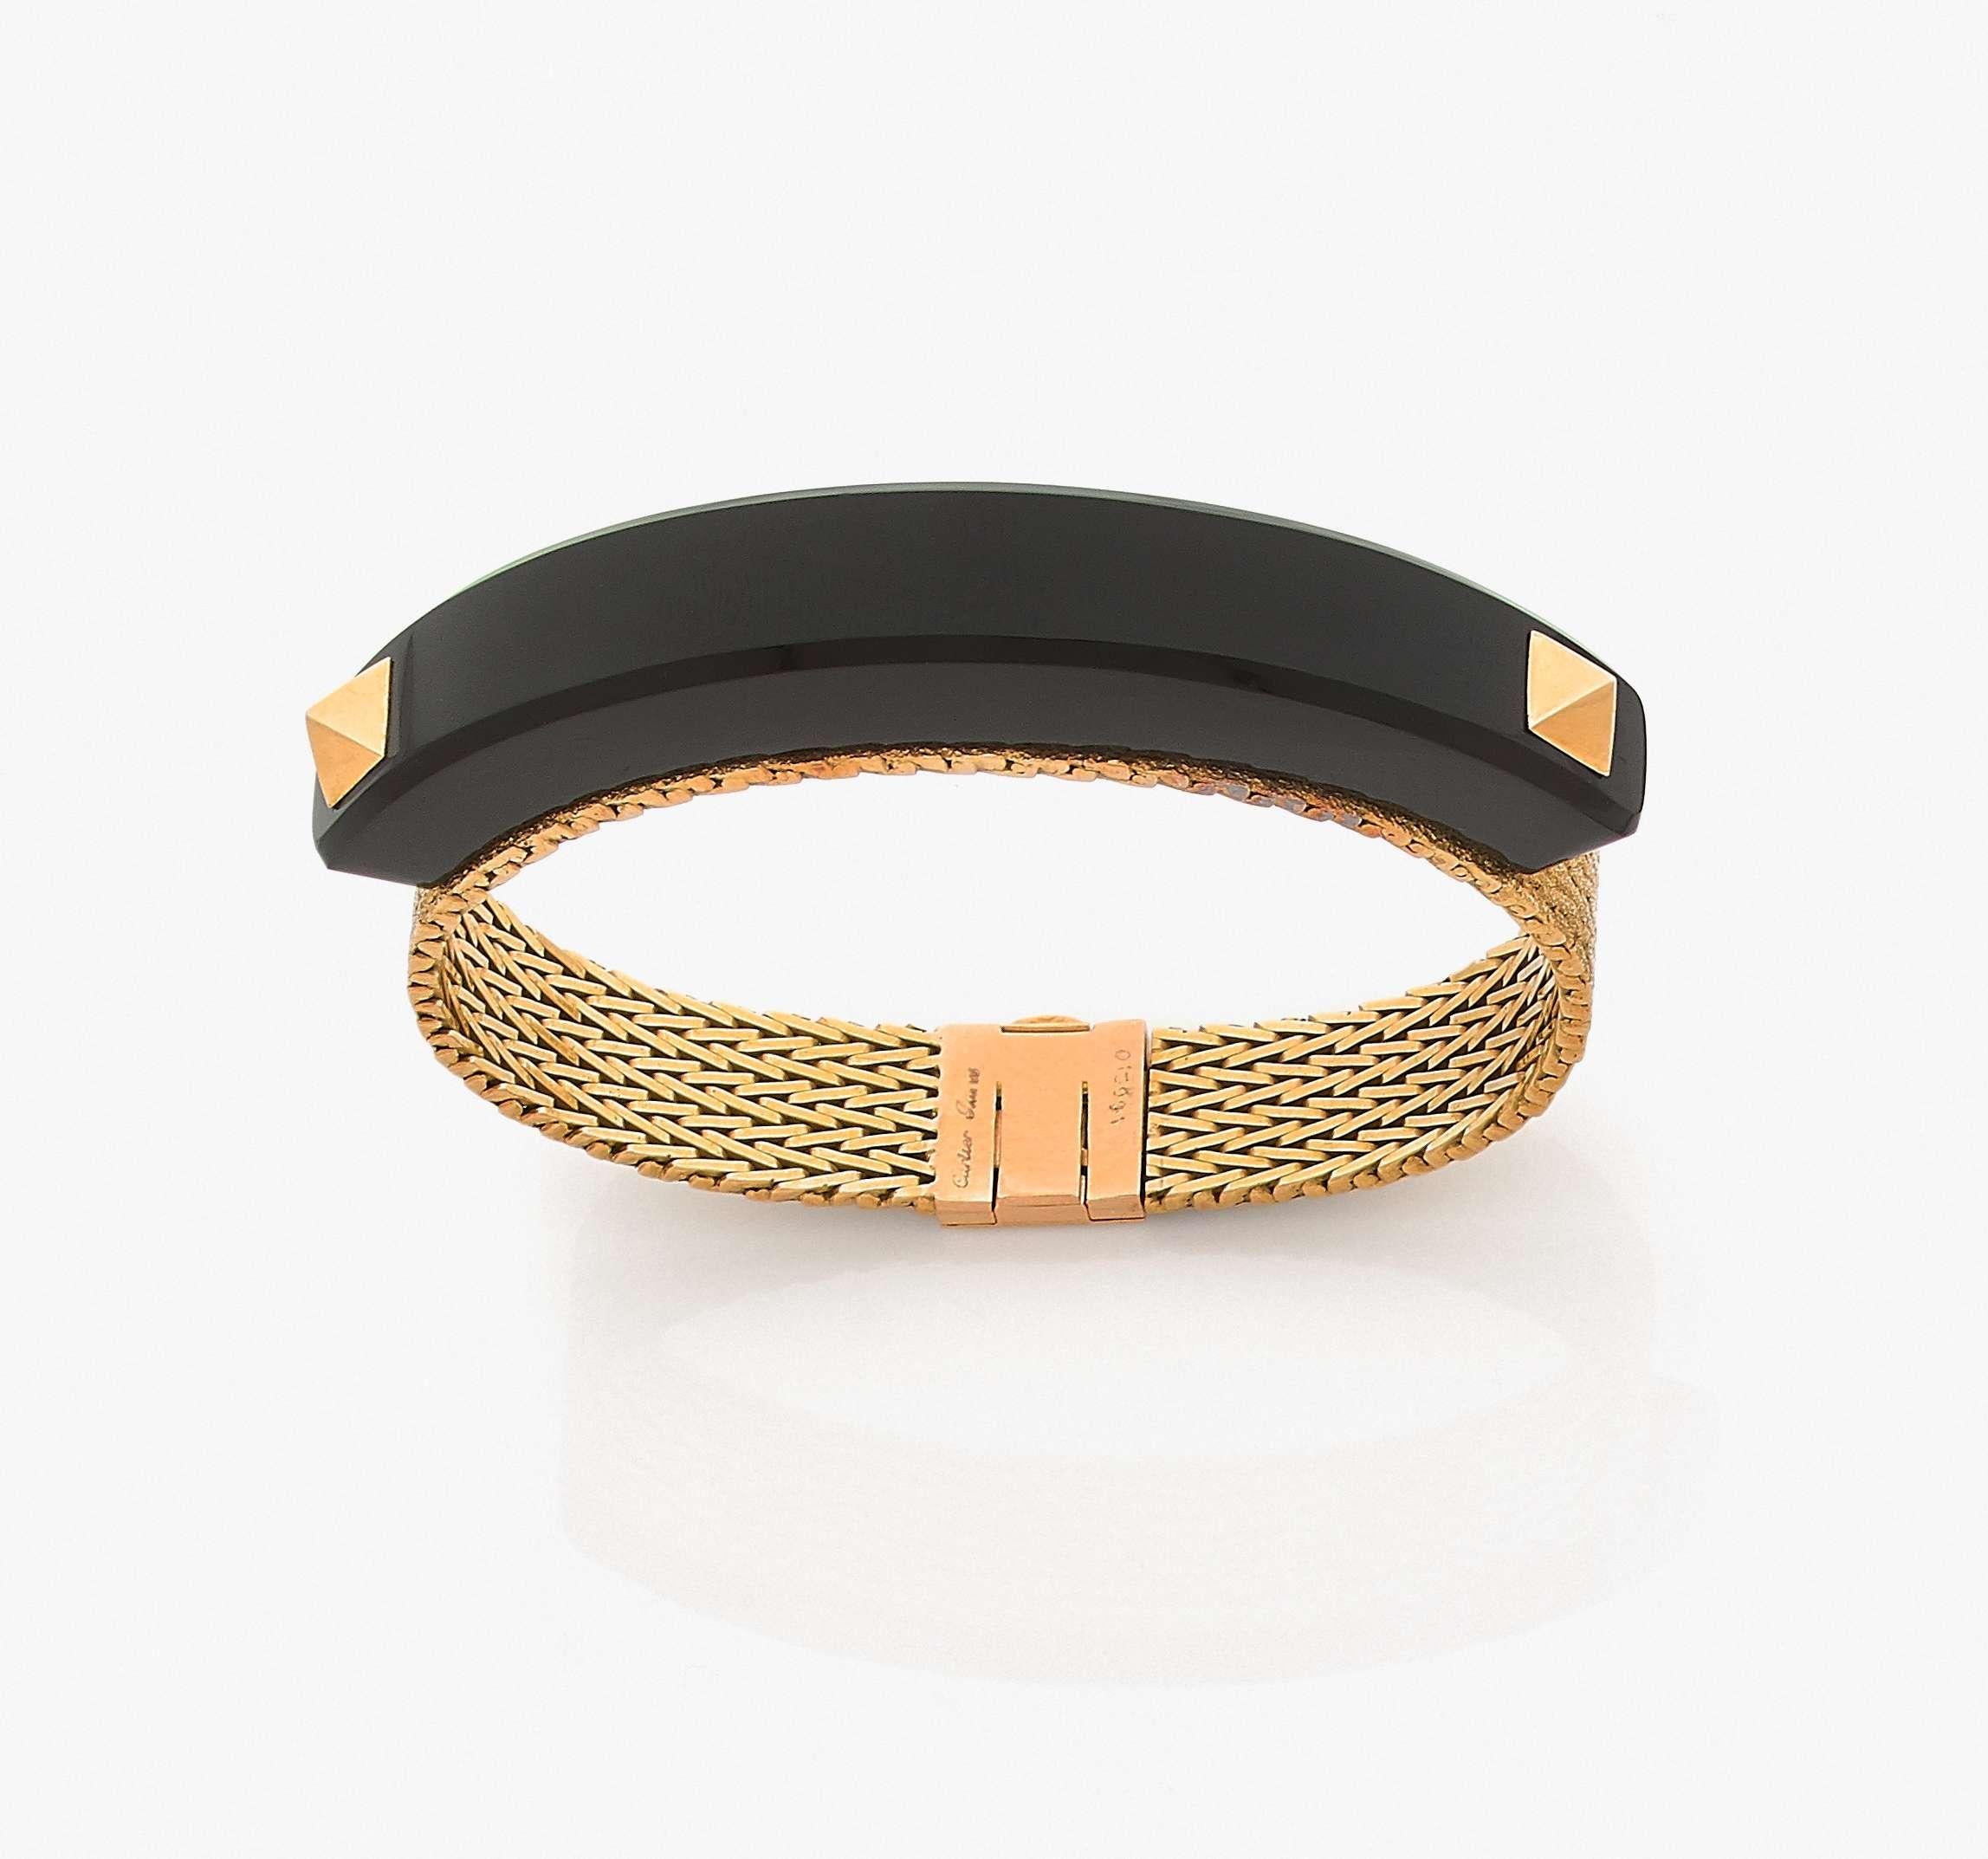 Cartier Art Deco Bracelet in 18k yellow gold with an onyx arch on top of it presenting two pyramidal studs. 

Signed Cartier Paris 186210.
